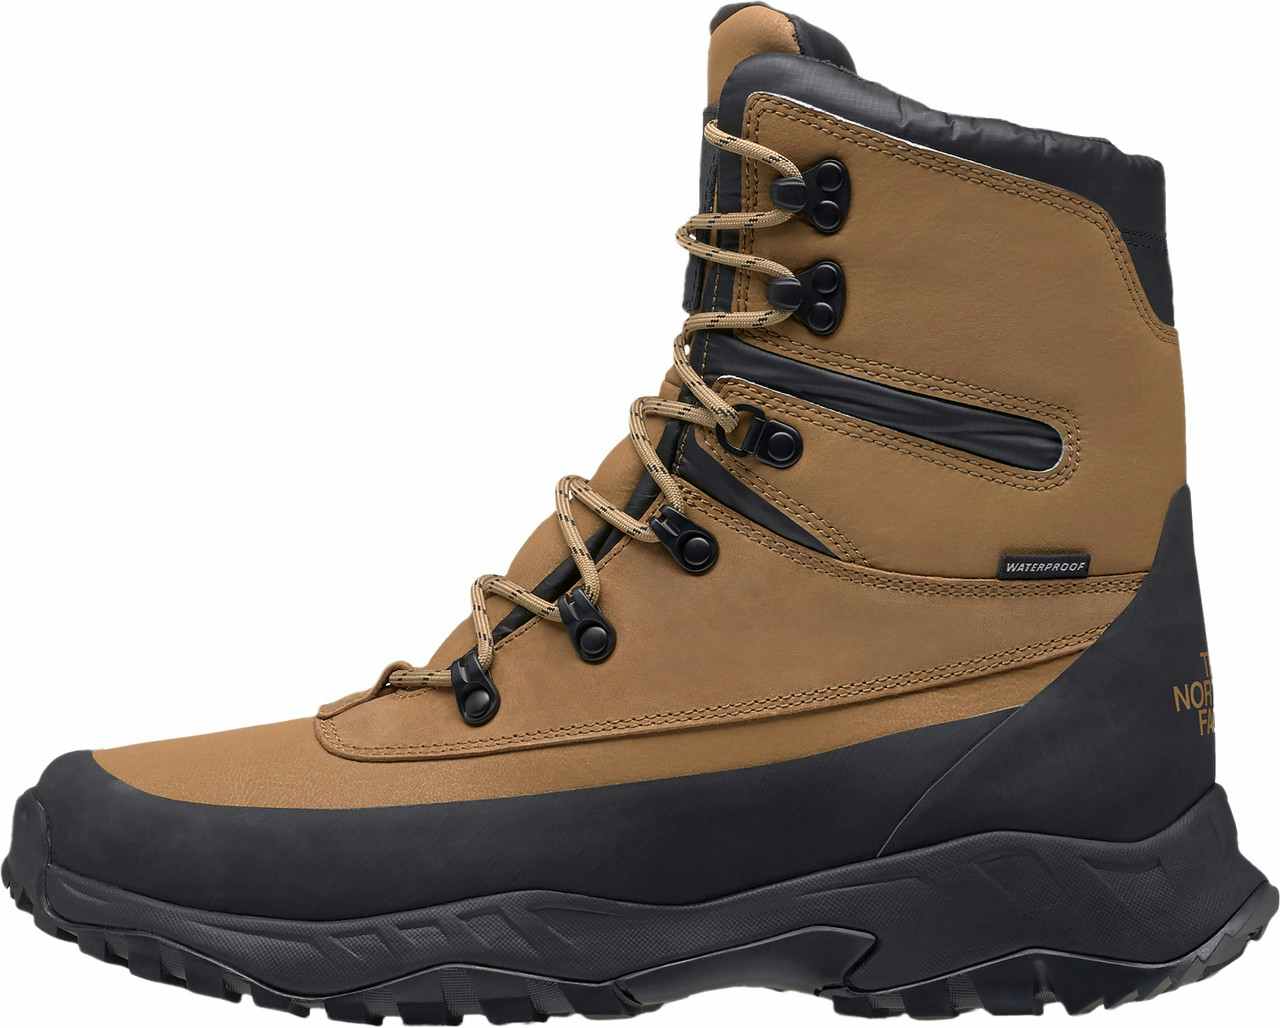 Bottes d'hiver imperméables ThermoBall Lifty II Brun utilitaire/Noir TNF